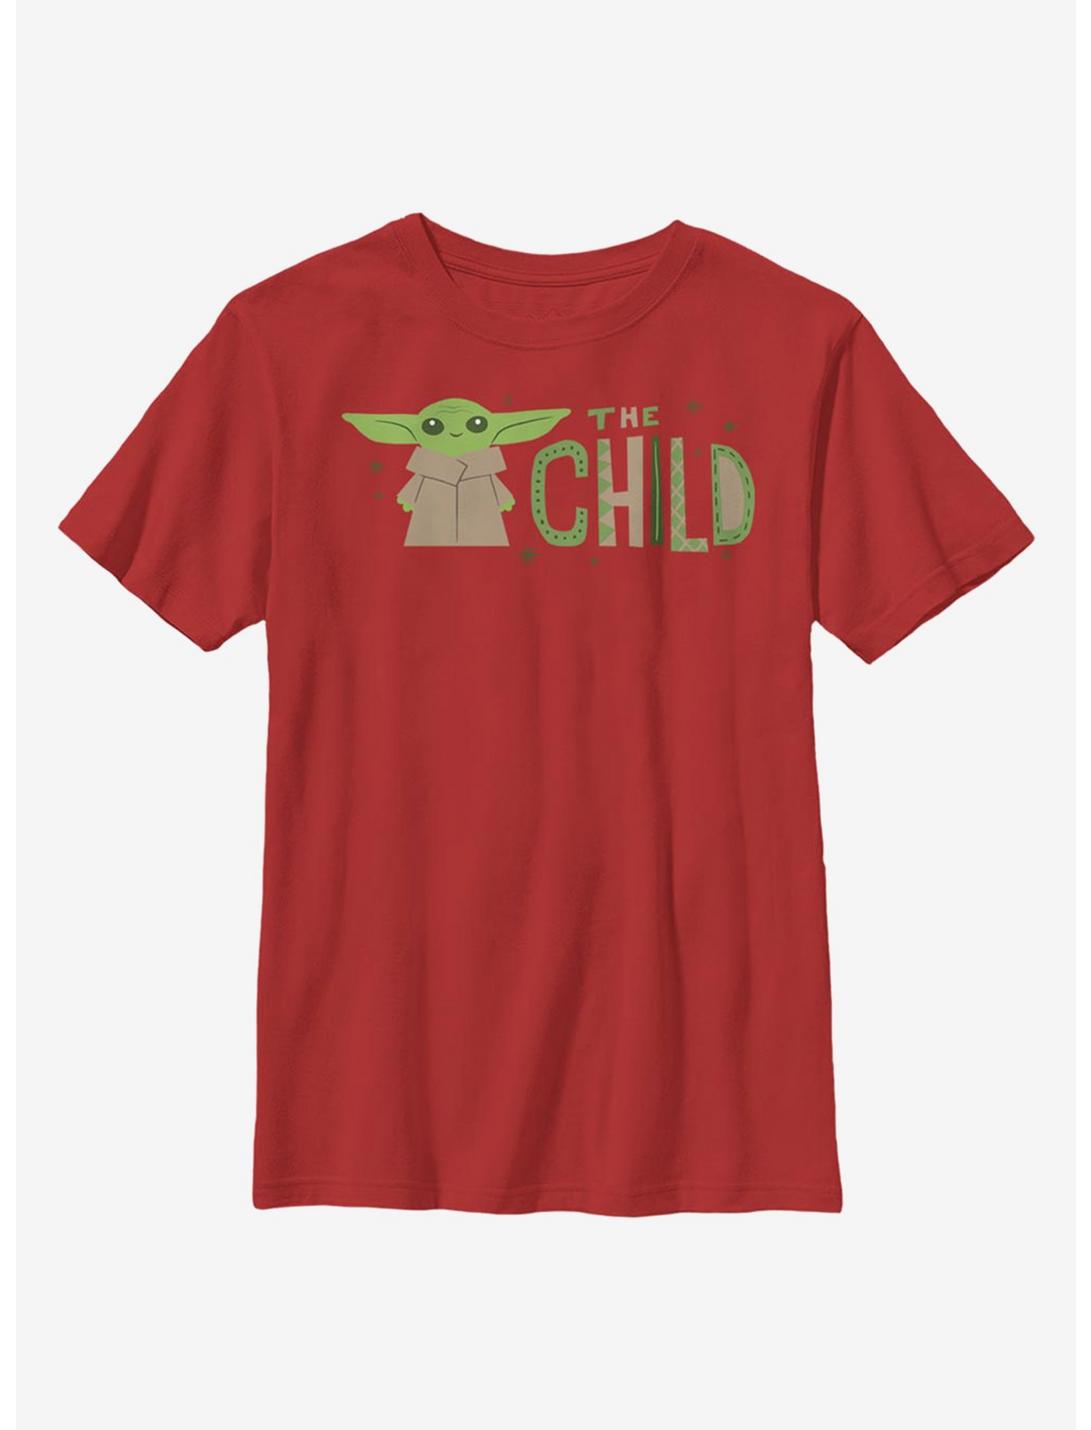 Star Wars The Mandalorian The Child Green Stars Youth T-Shirt, RED, hi-res